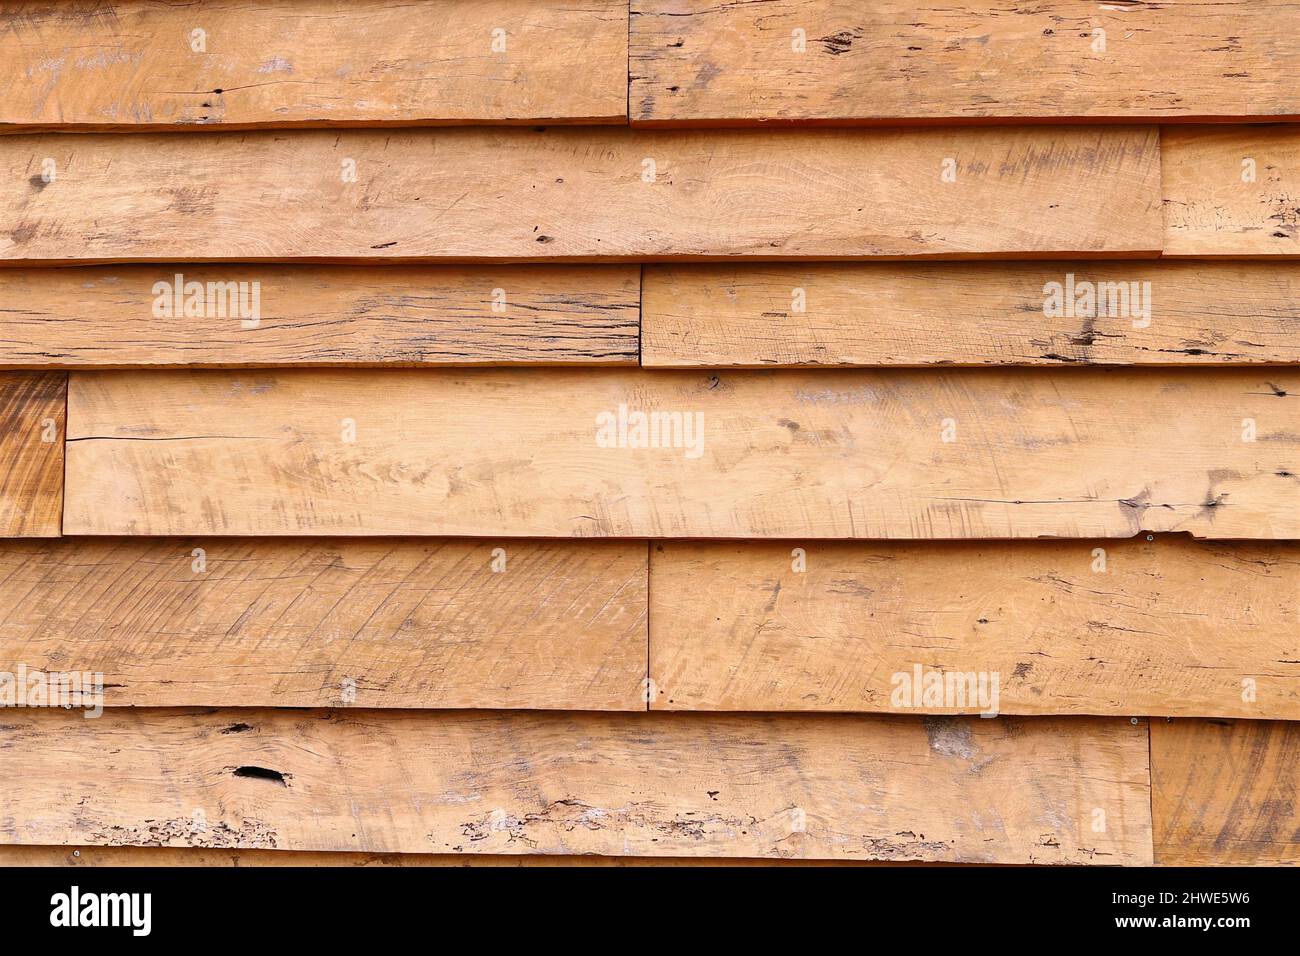 Wooden background made with rustic oak boards Stock Photo